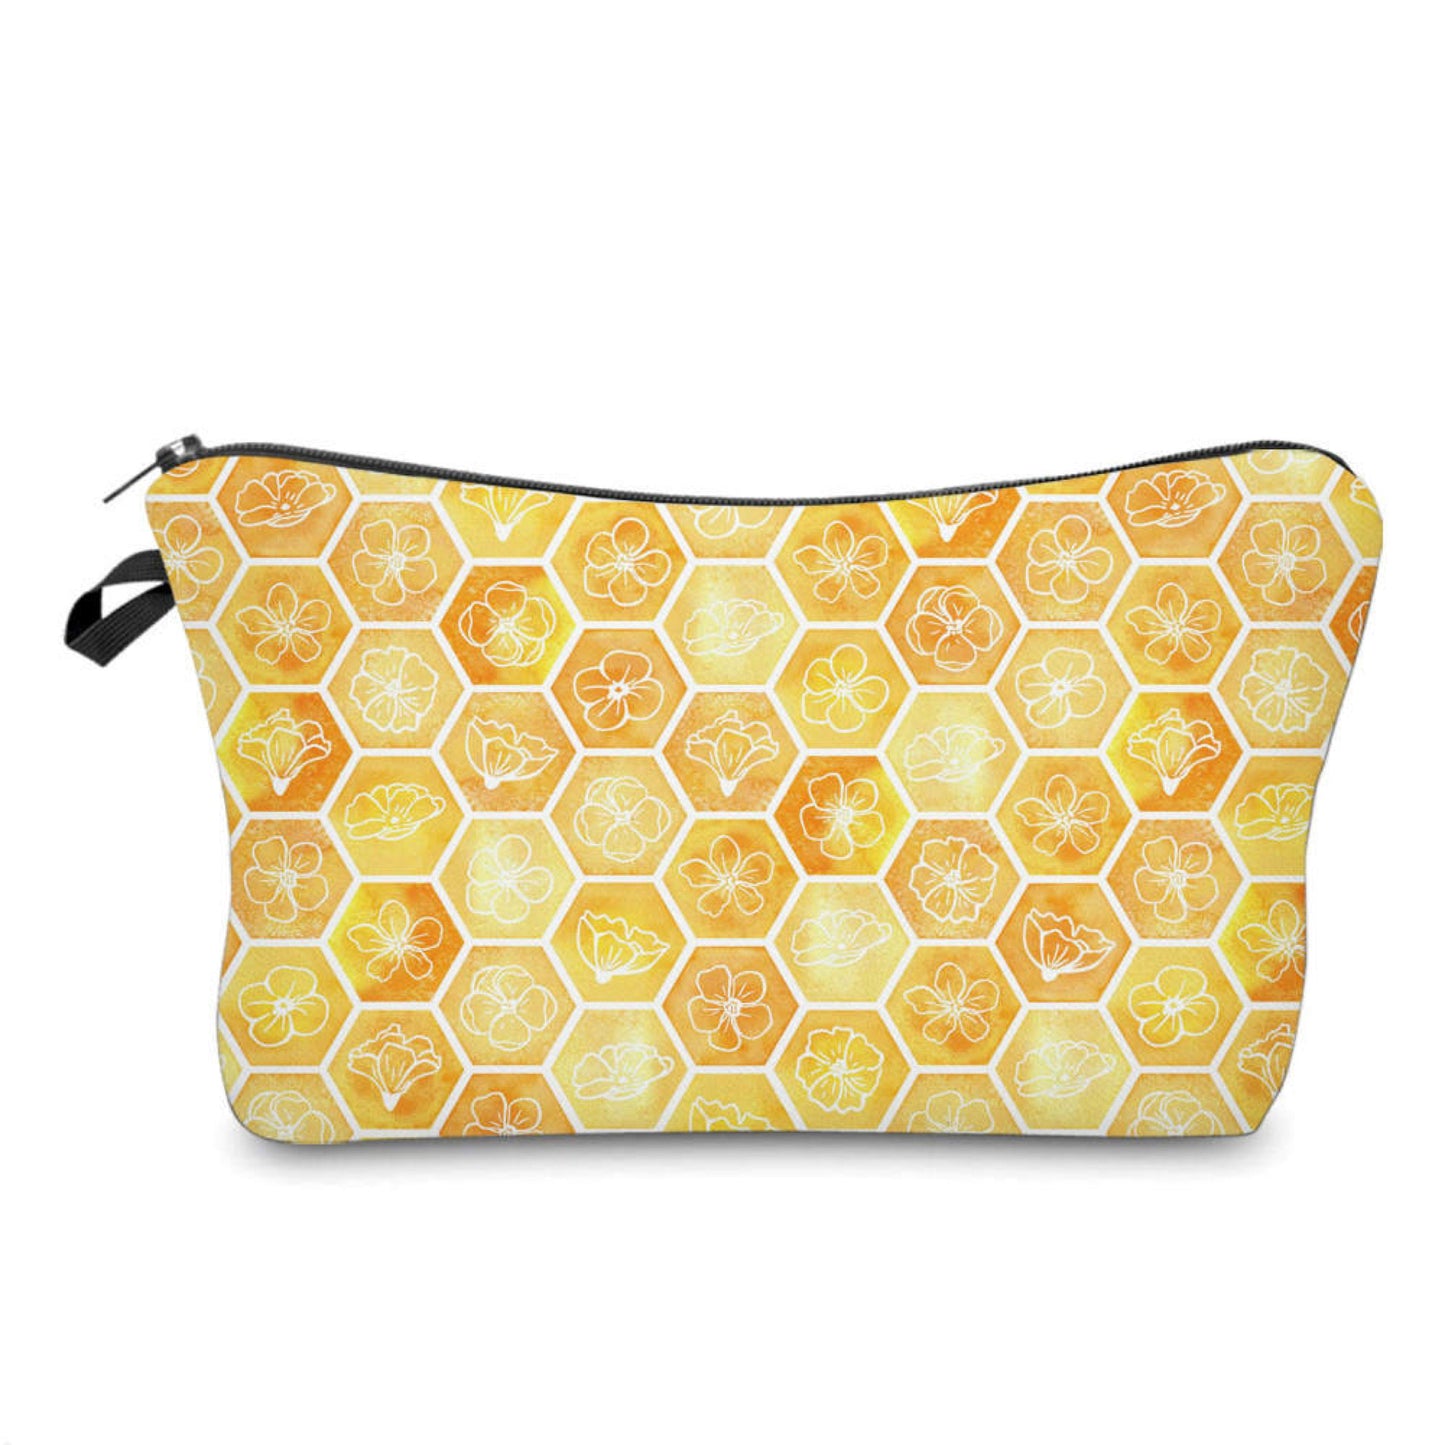 Pouch - Honeycomb Designs